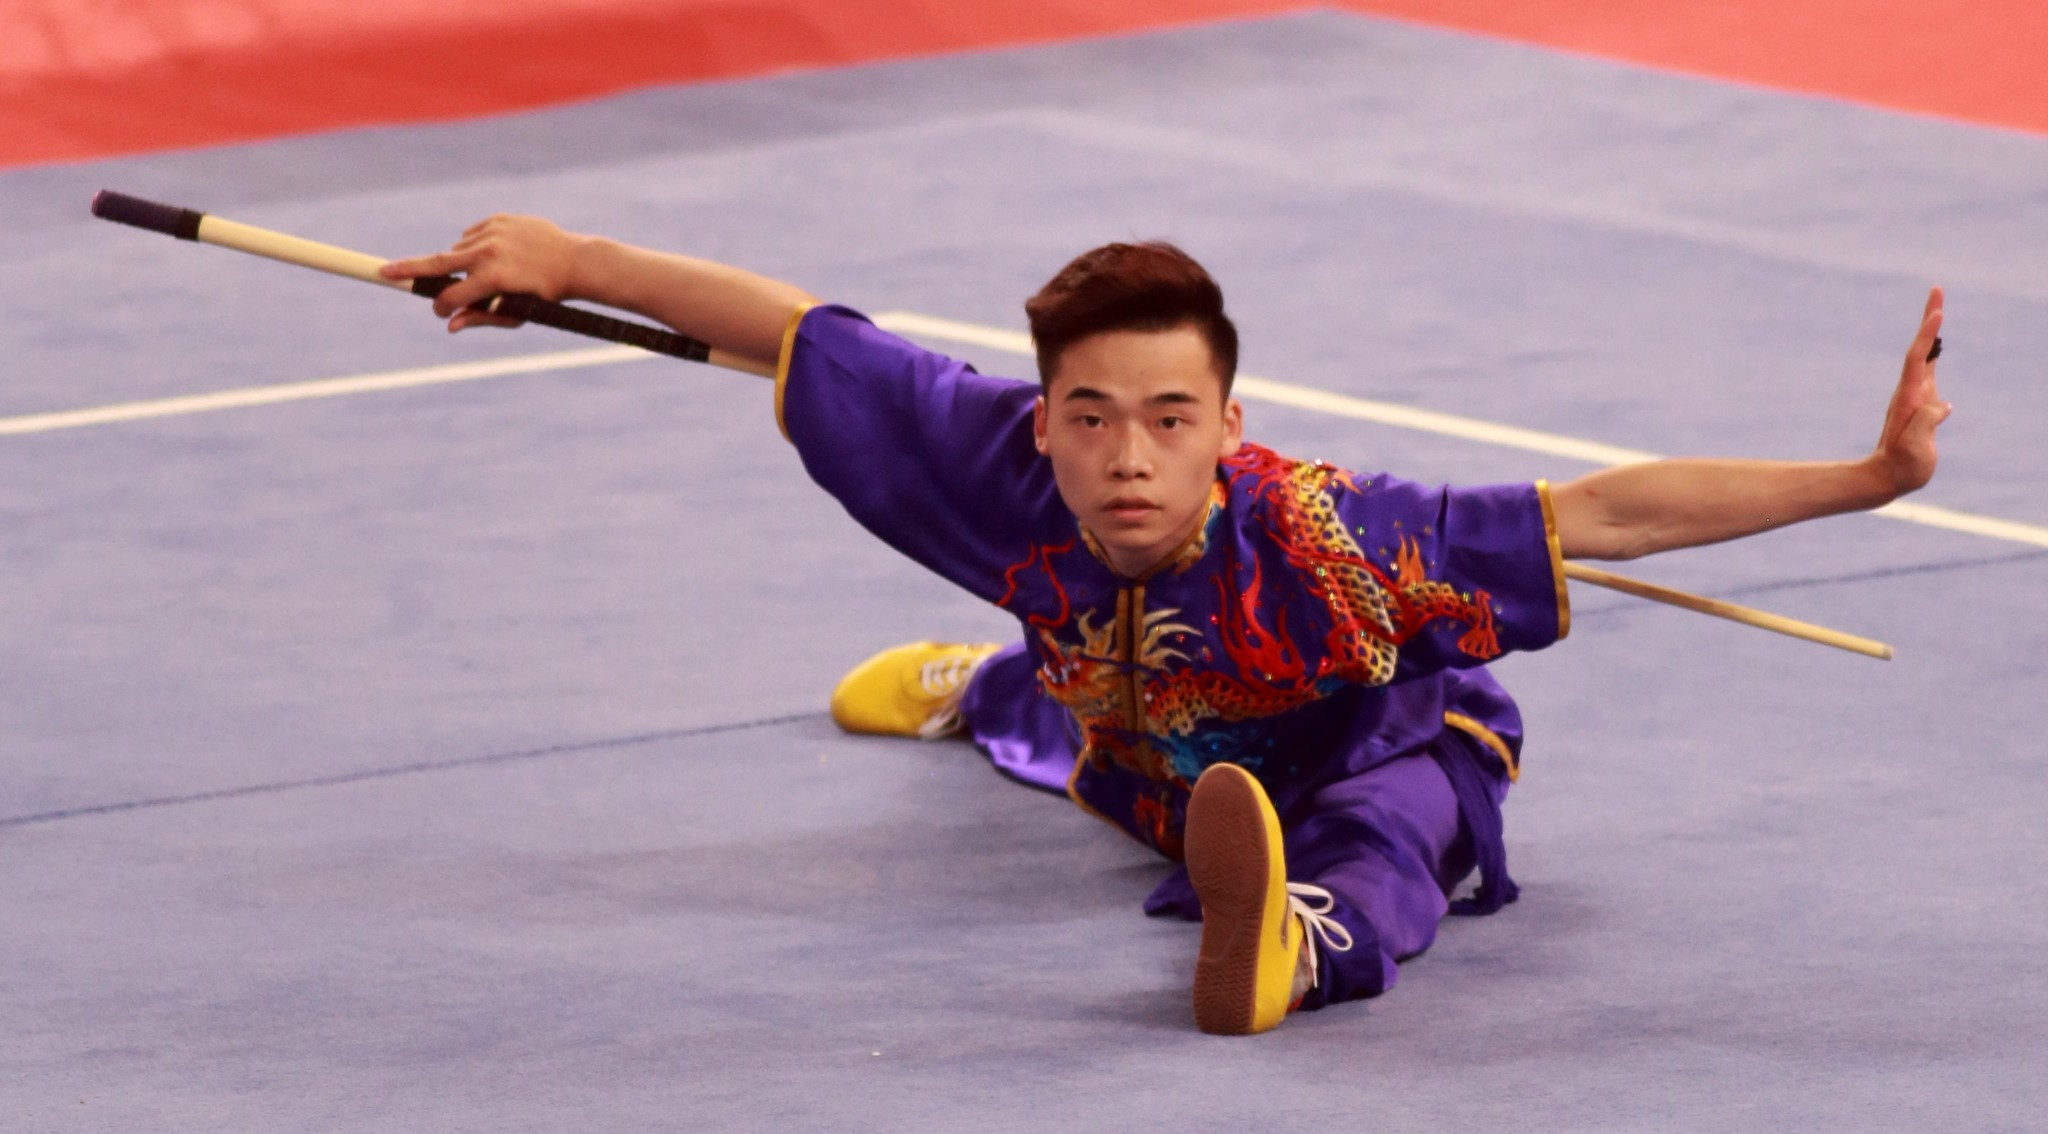 A total of 10 wushu gold medals were awarded today ©Taipei 2017